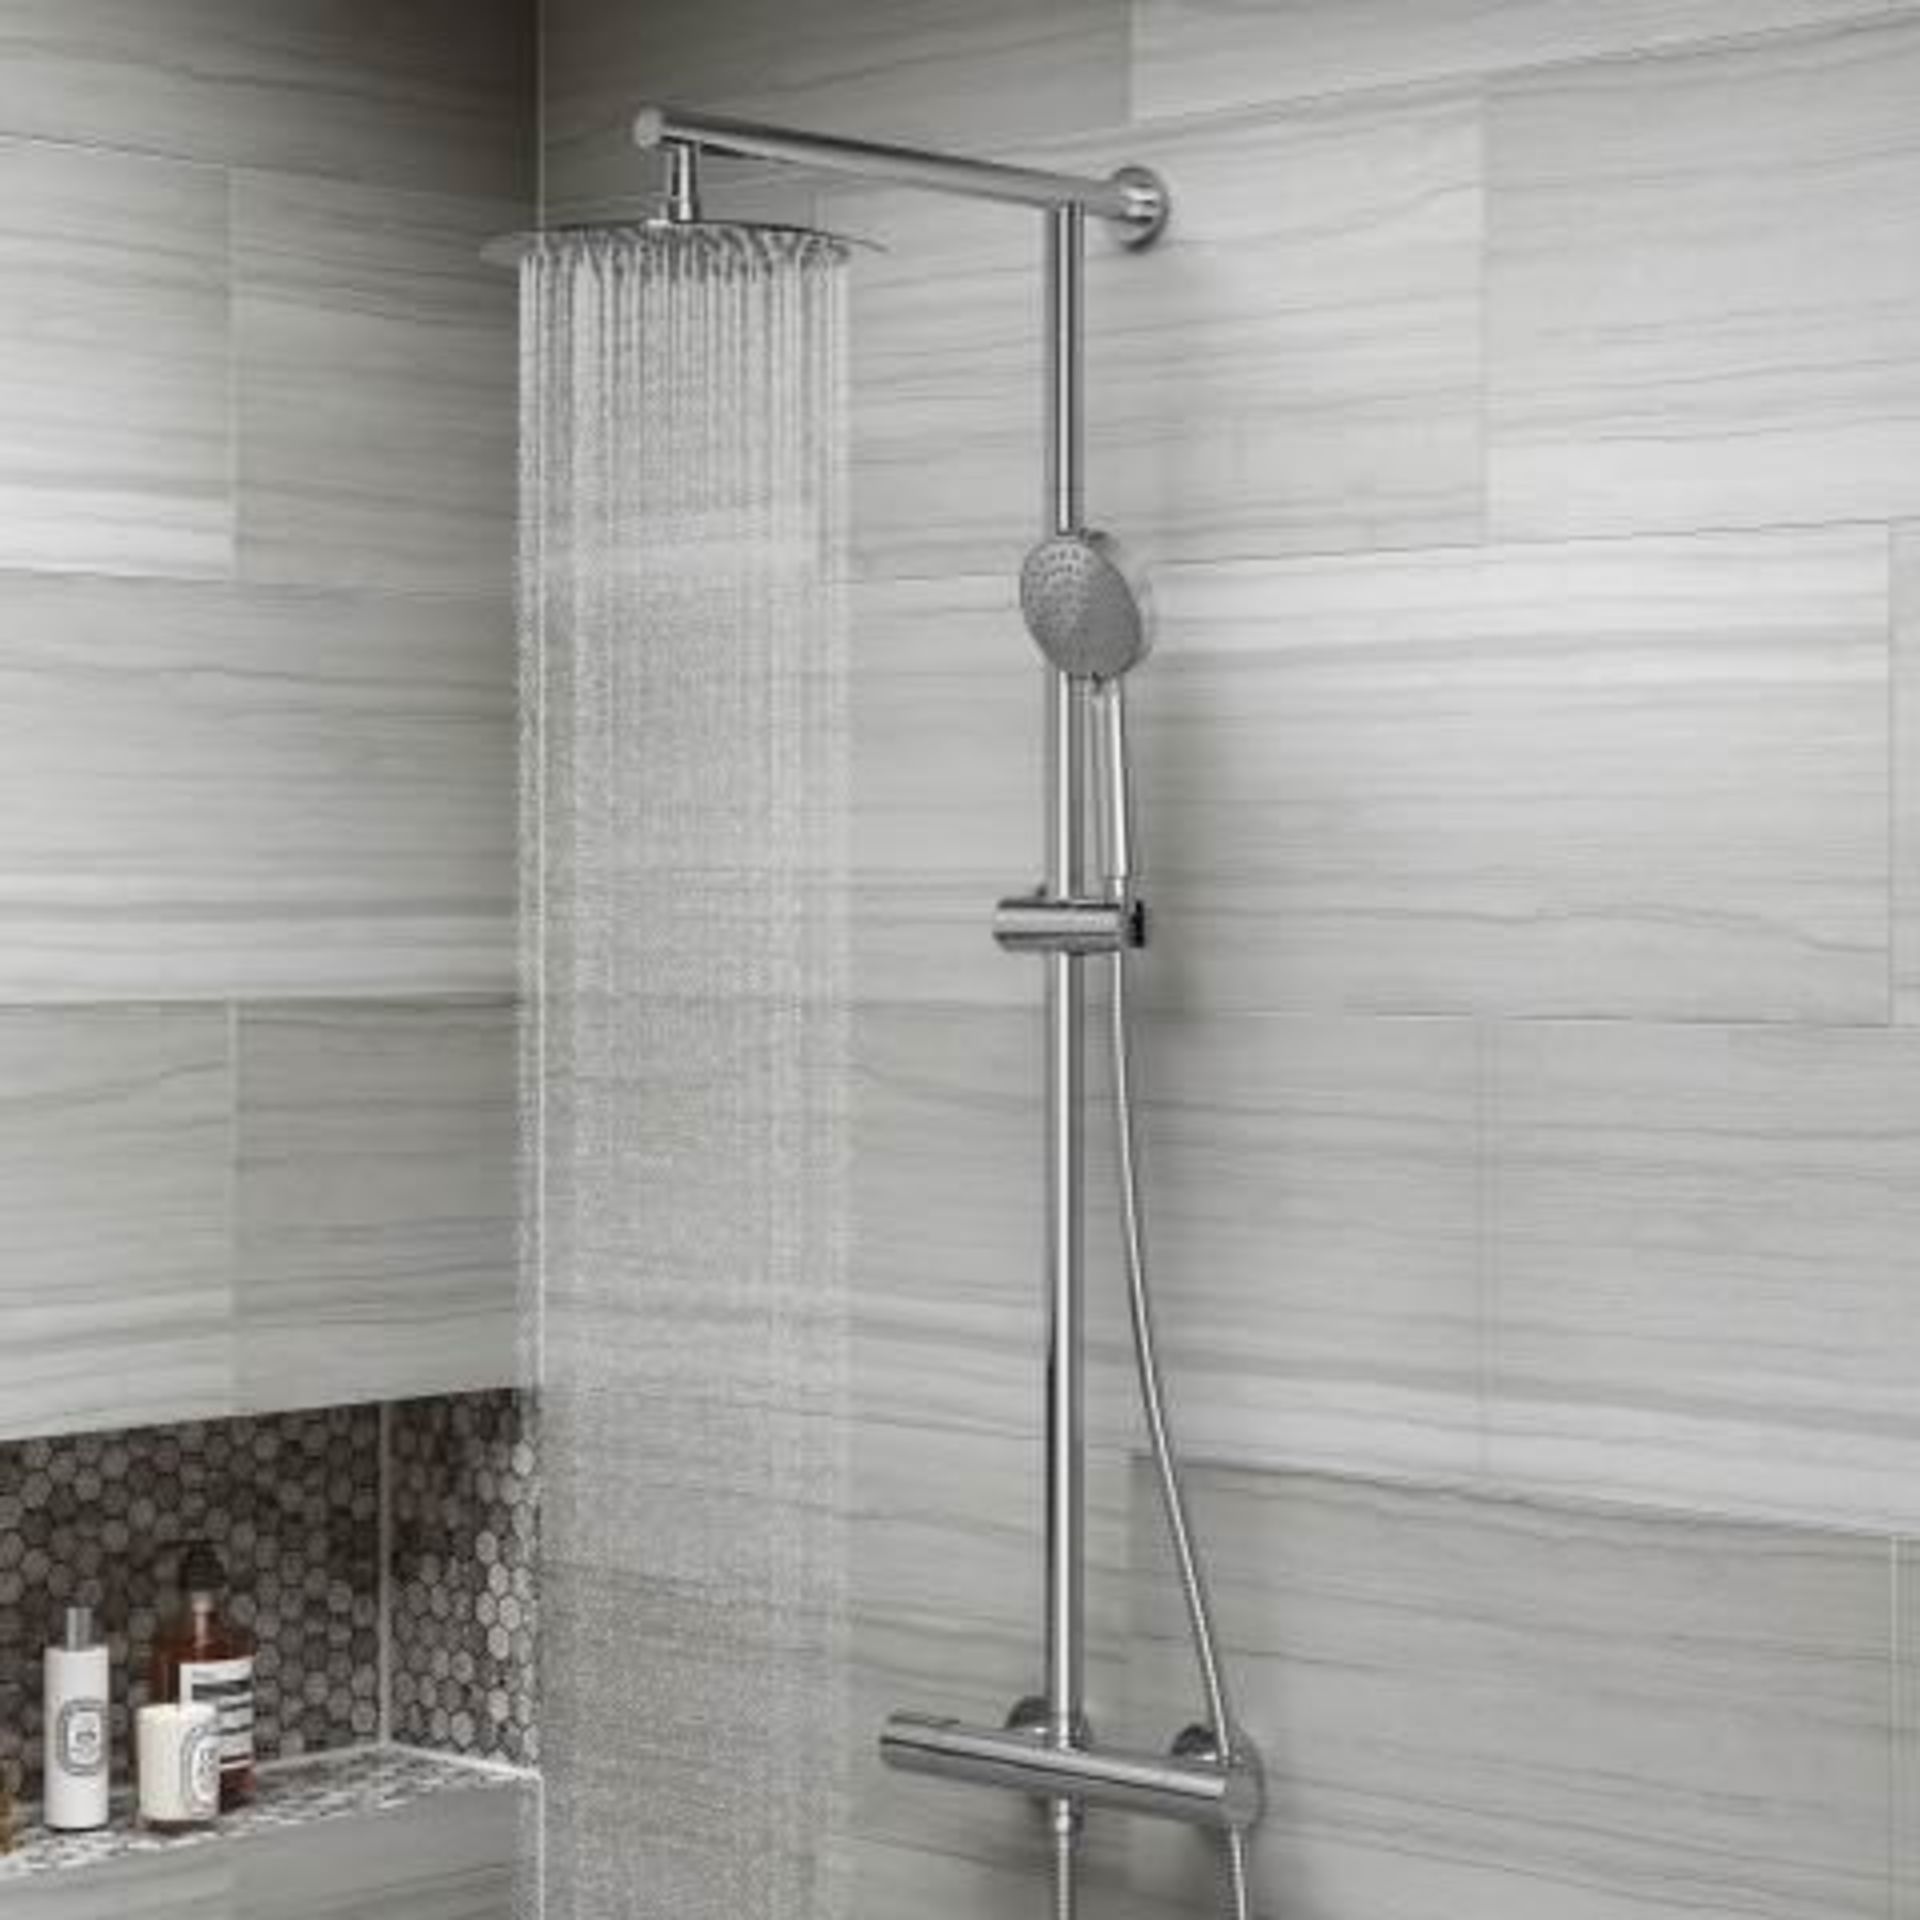 (P42) : 250mm Large Round Head Thermostatic Exposed Shower Kit & Handheld. RRP £299.99. Designer